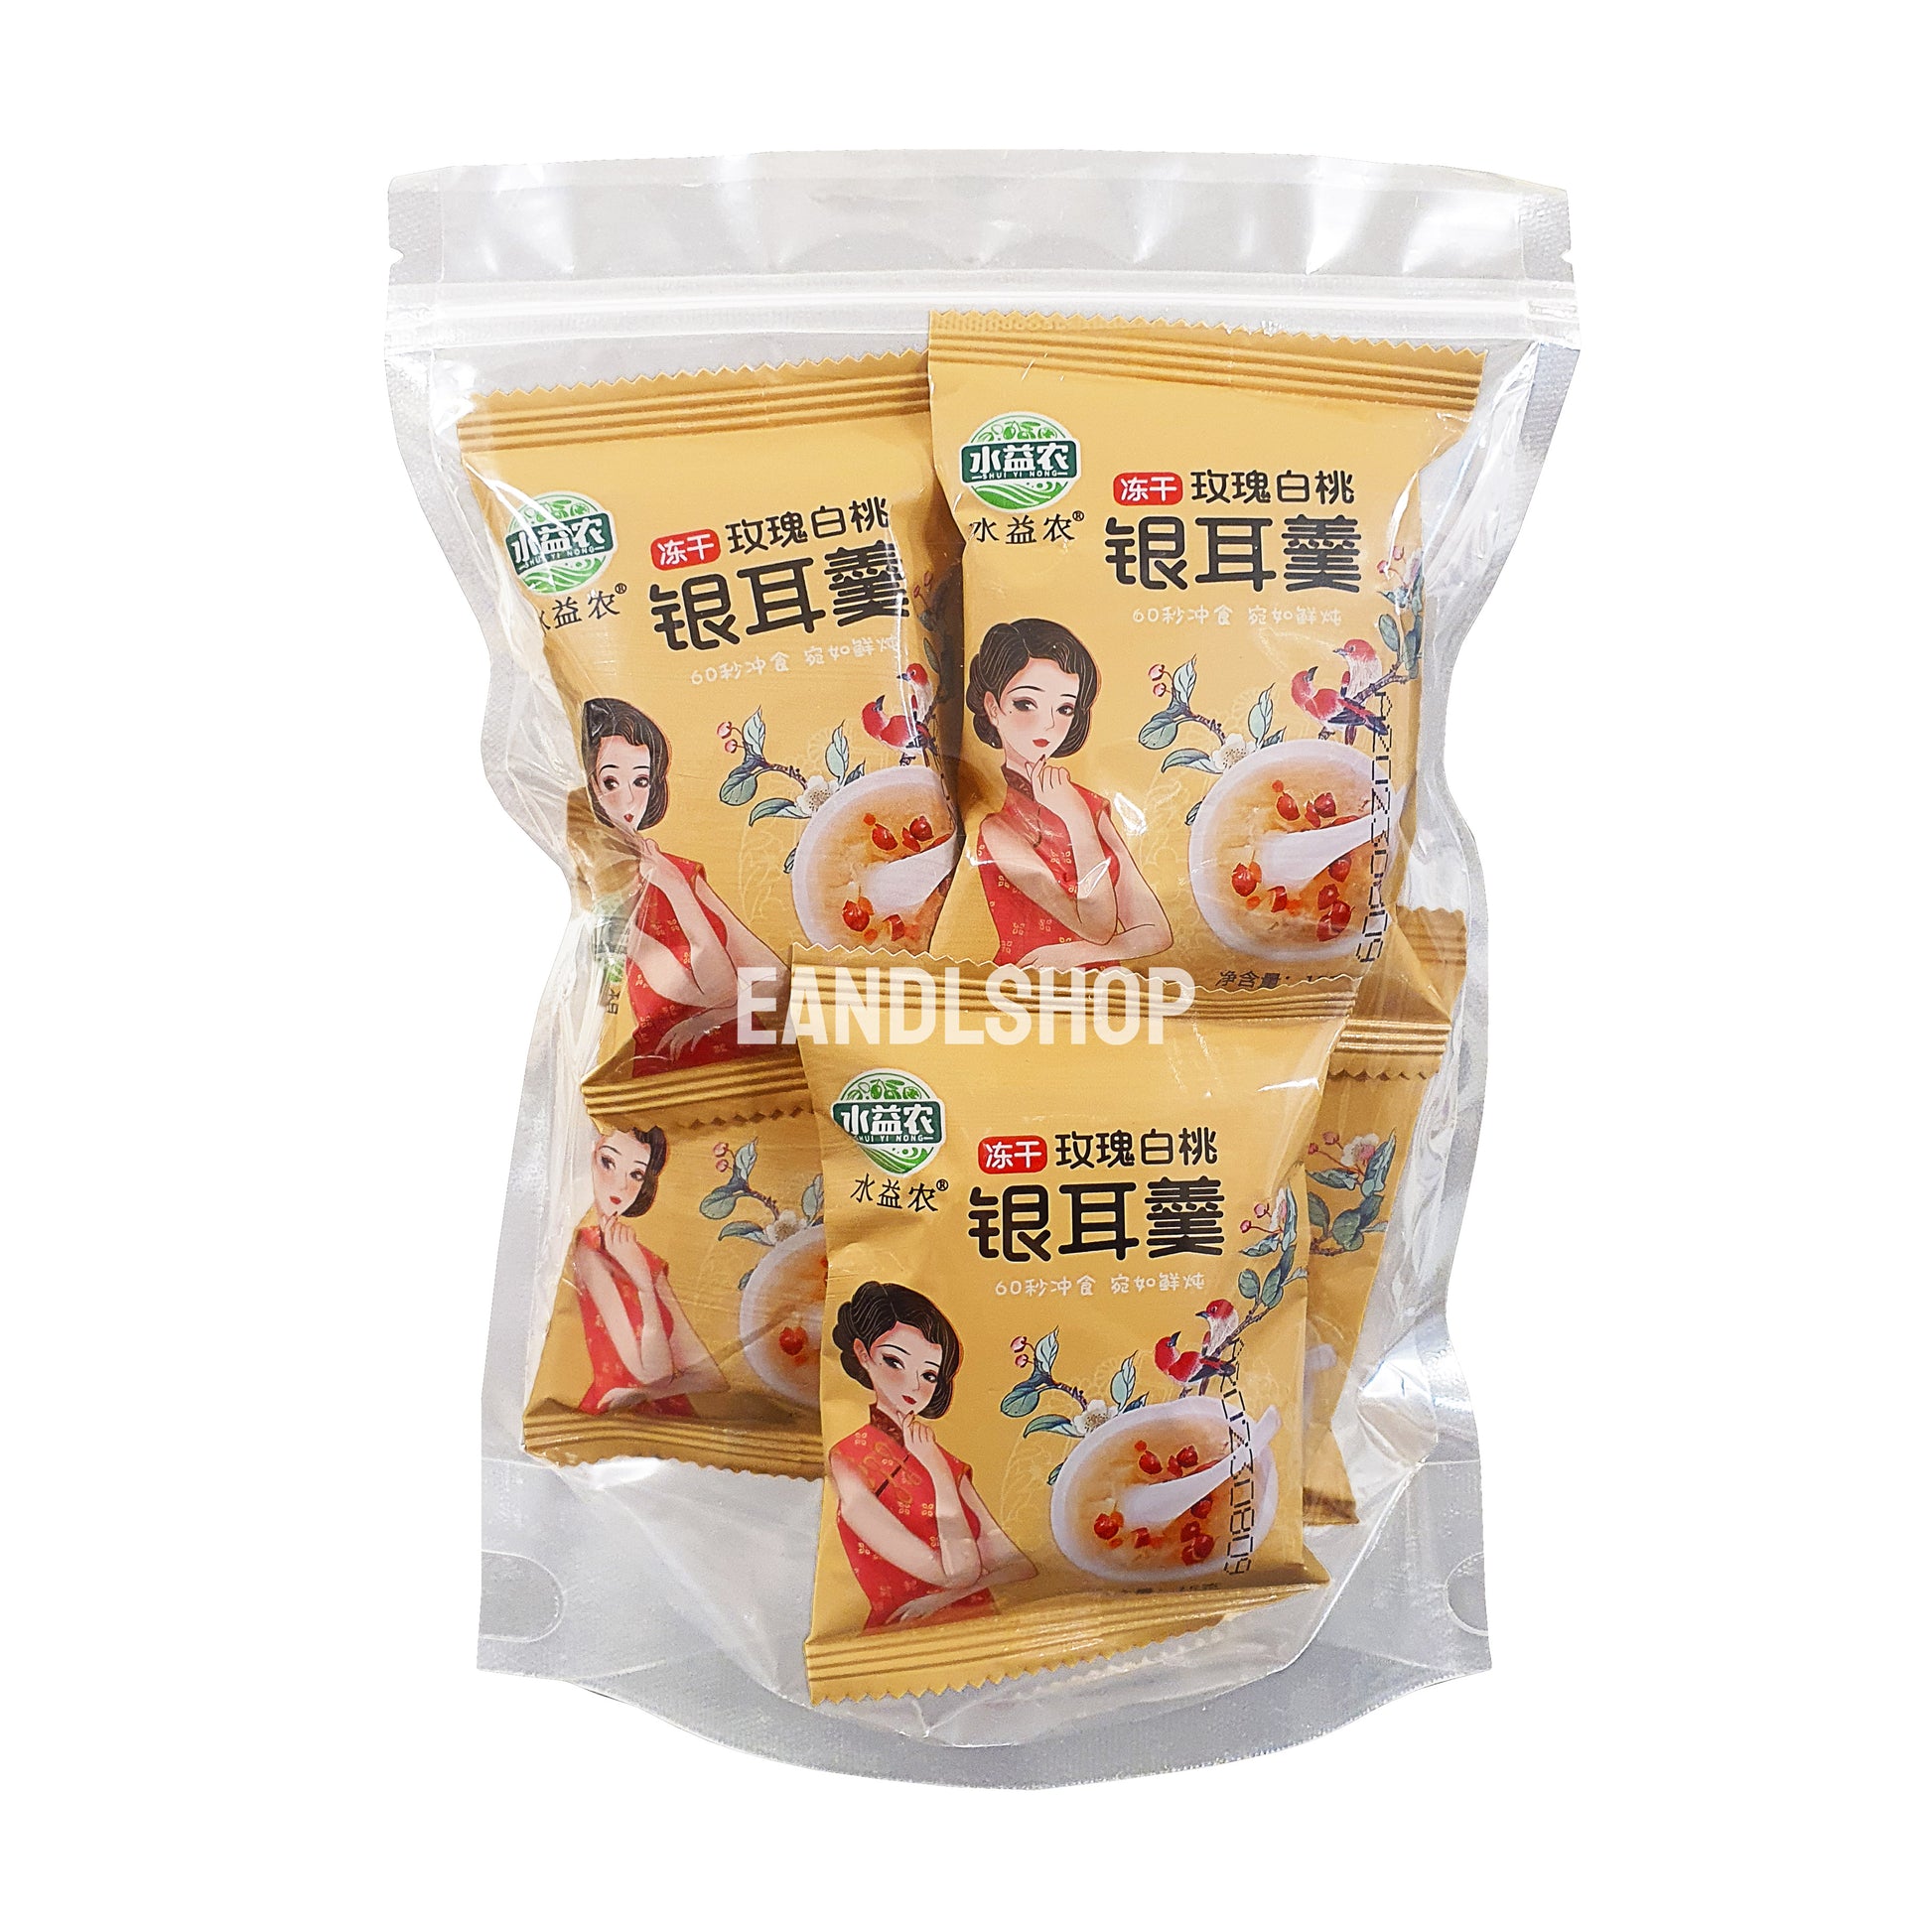 Rose White Peach White fungus soup.Old-school biscuits, modern snacks (chips, crackers), cakes, gummies, plums, dried fruits, nuts, herbal tea – available at www.EANDLSHOP.com